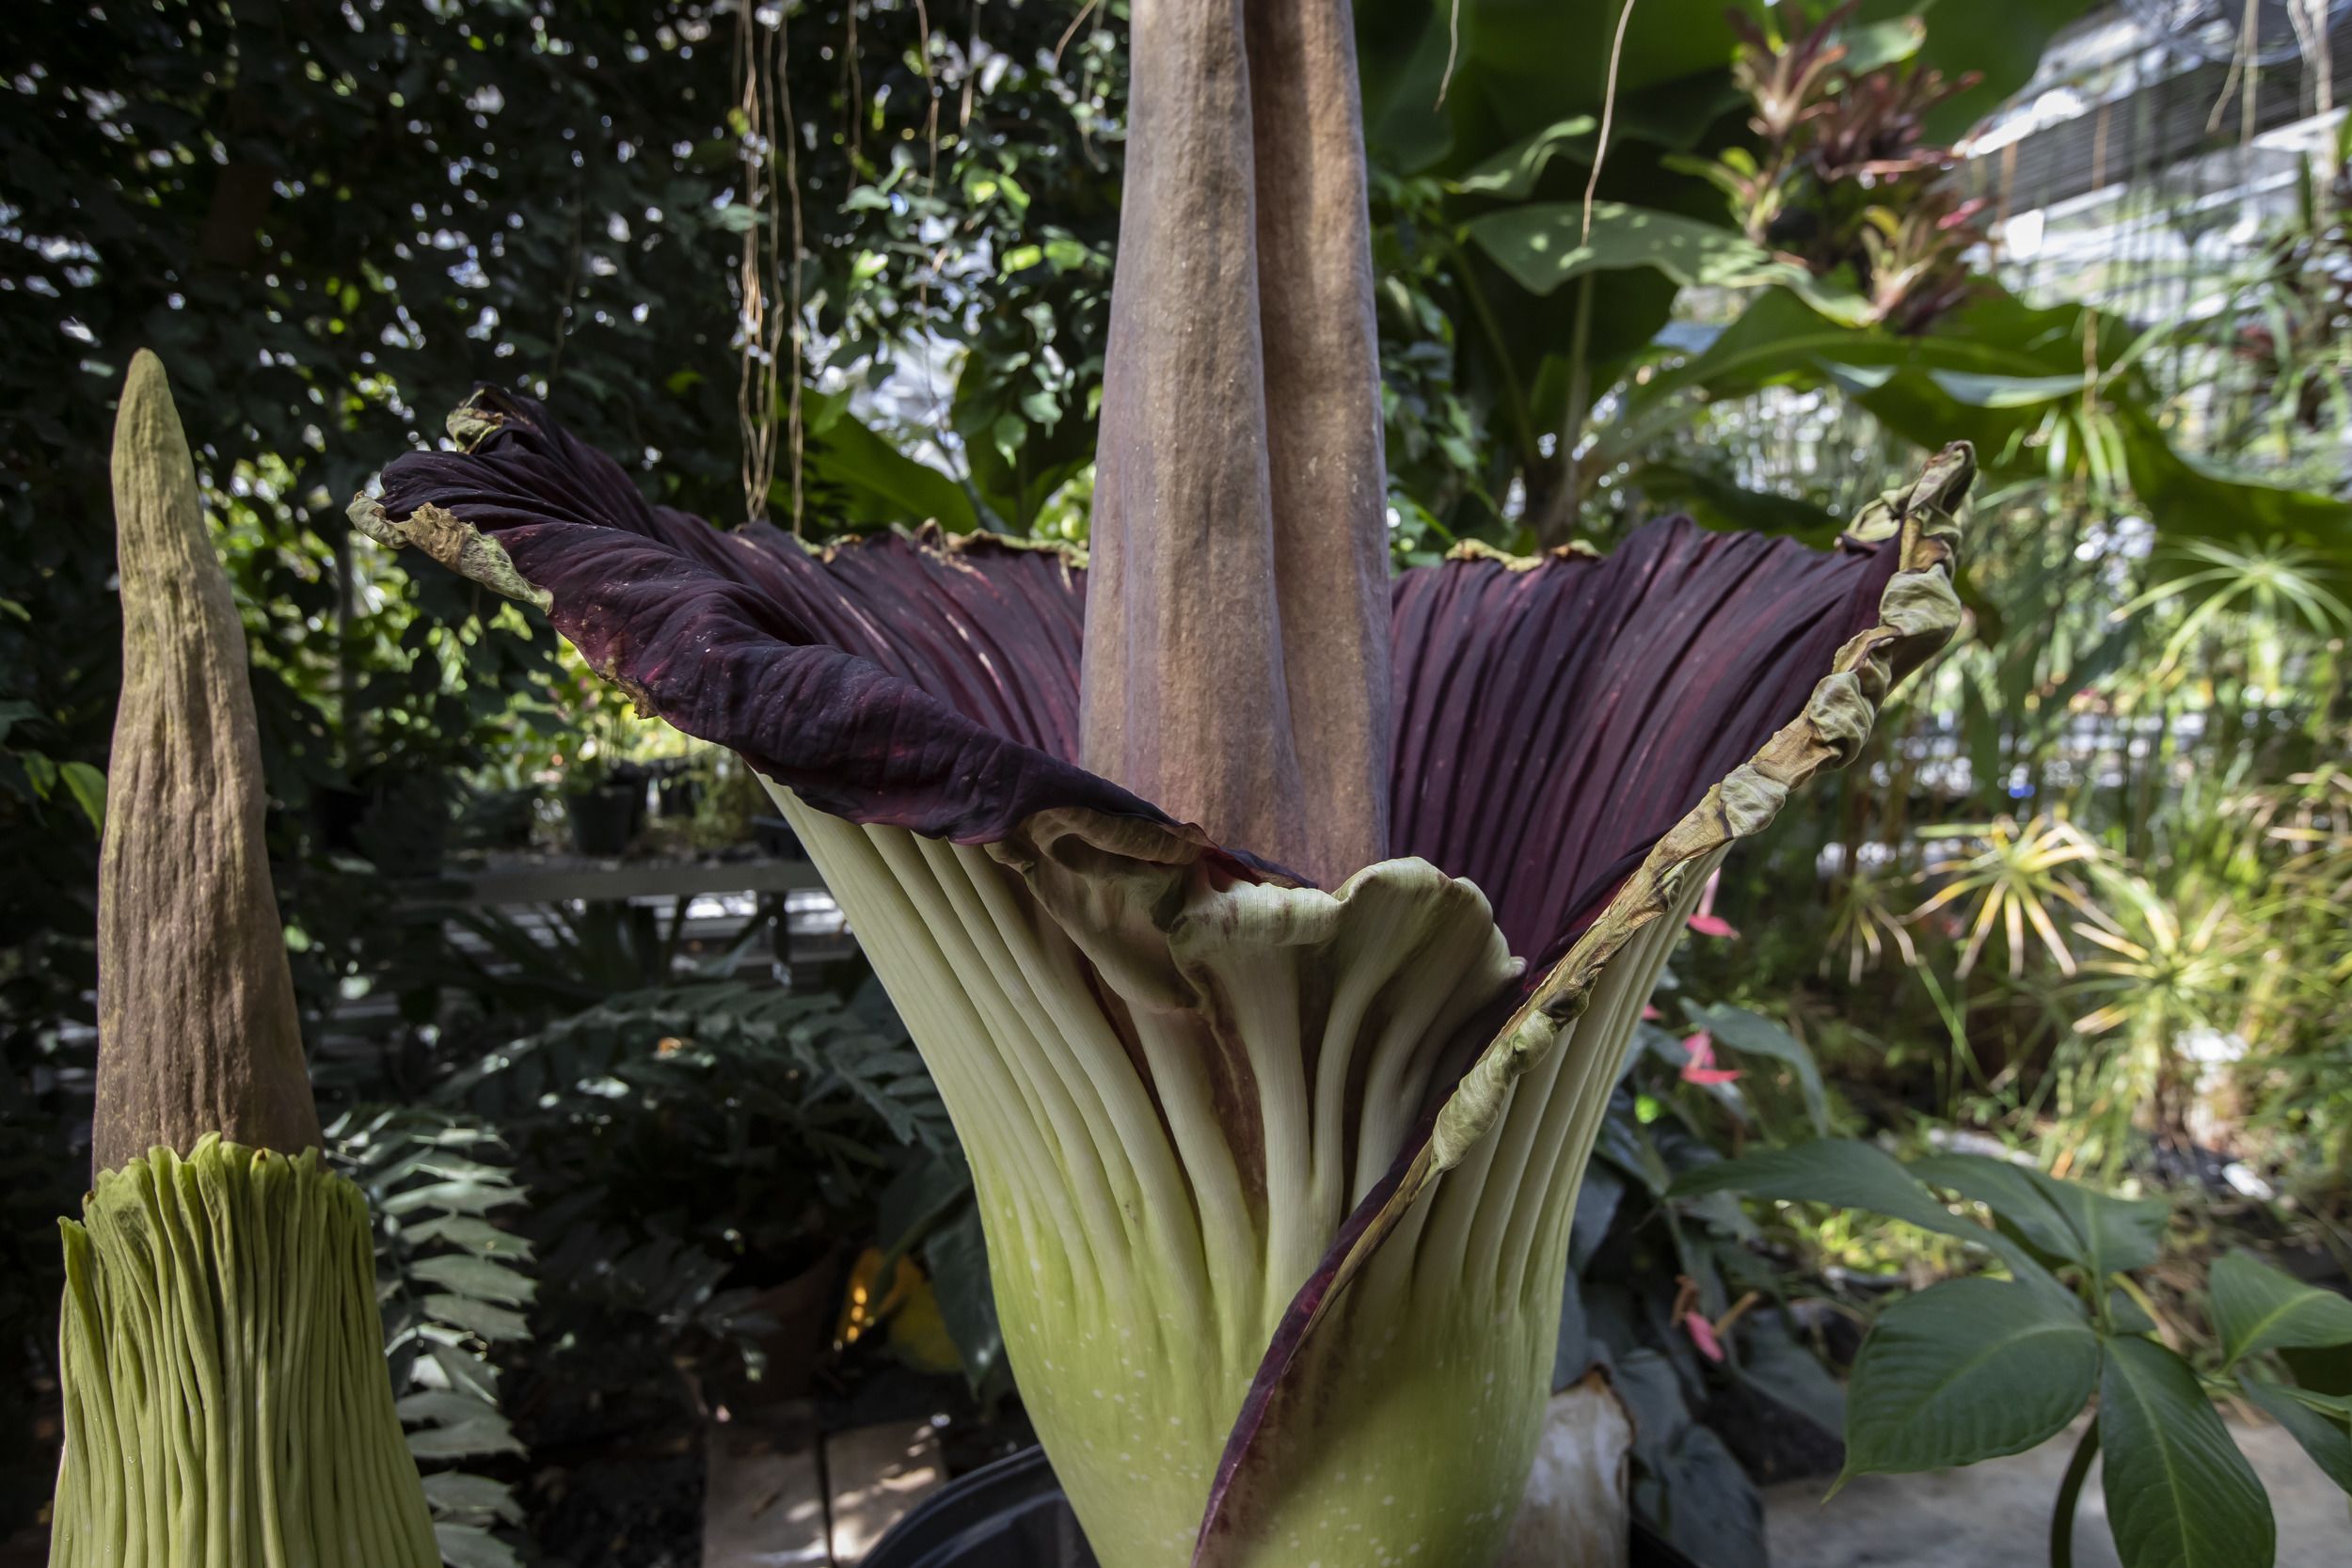 Giant corpse flowers at Temple Ambler